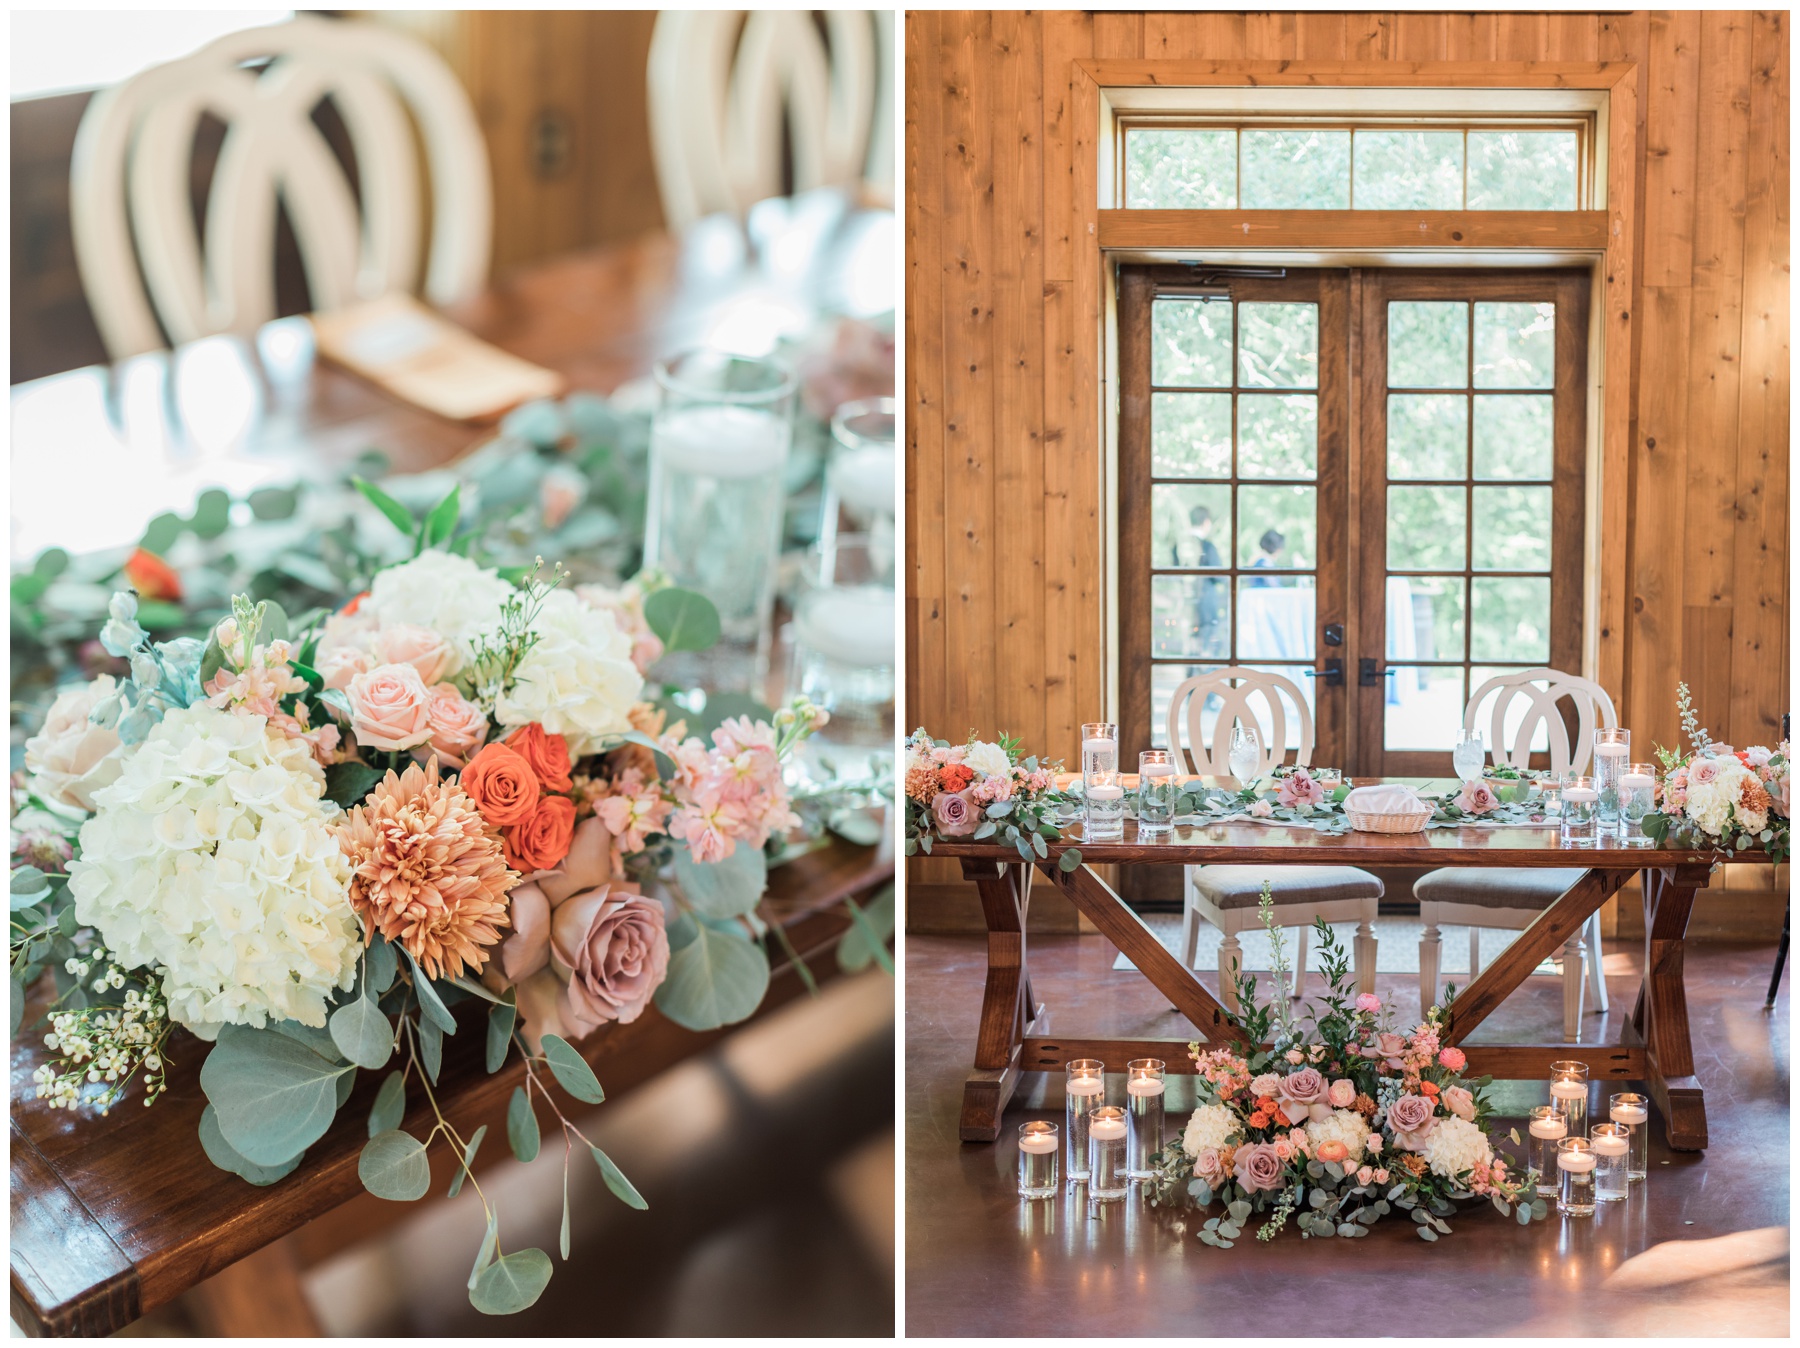 A sweetheart table decorated with an arrangement of roses, hydrangeas, and eucalyptus by Sommer Floral Co.